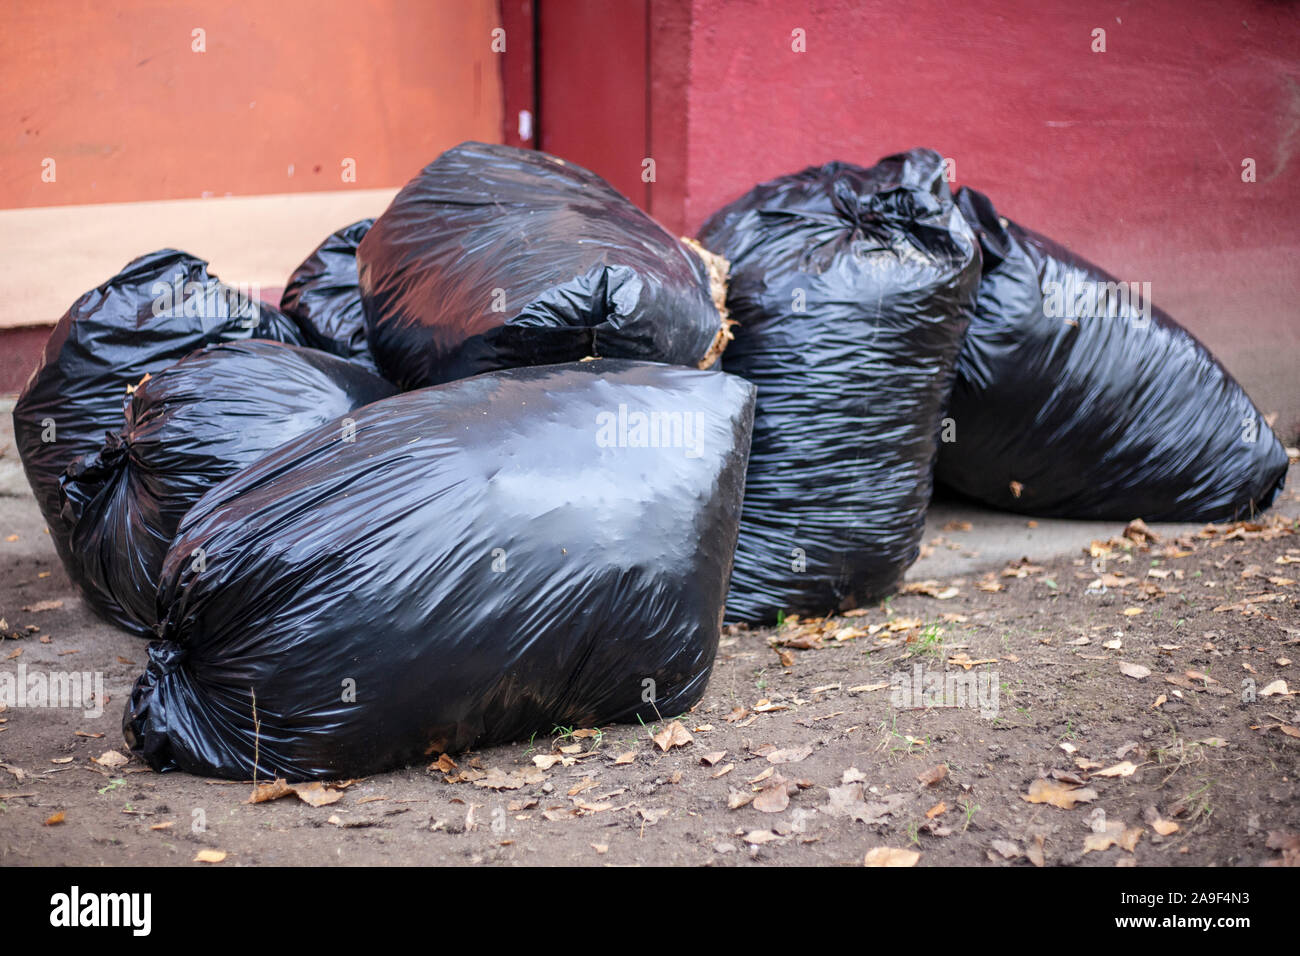 Plastic black bags with household waste. Cleaning the area from garbage. The work of utilities to collect garbage in bags. Heavy black bags. Stock Photo